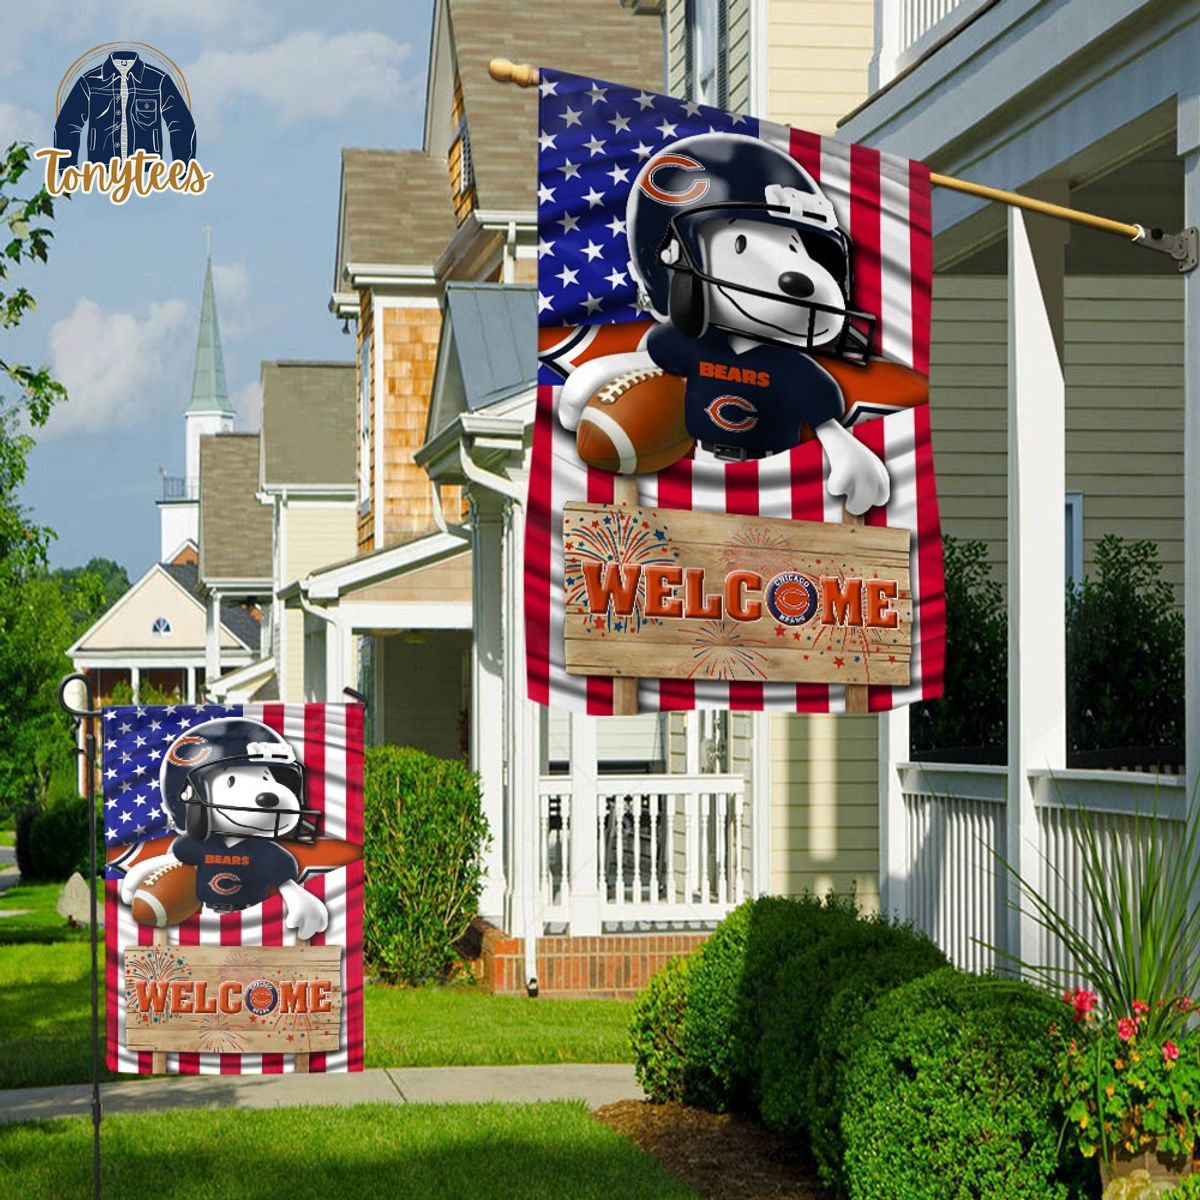 Snoopy Peanuts Chicago Bears Welcome Custom Name Garden Flag